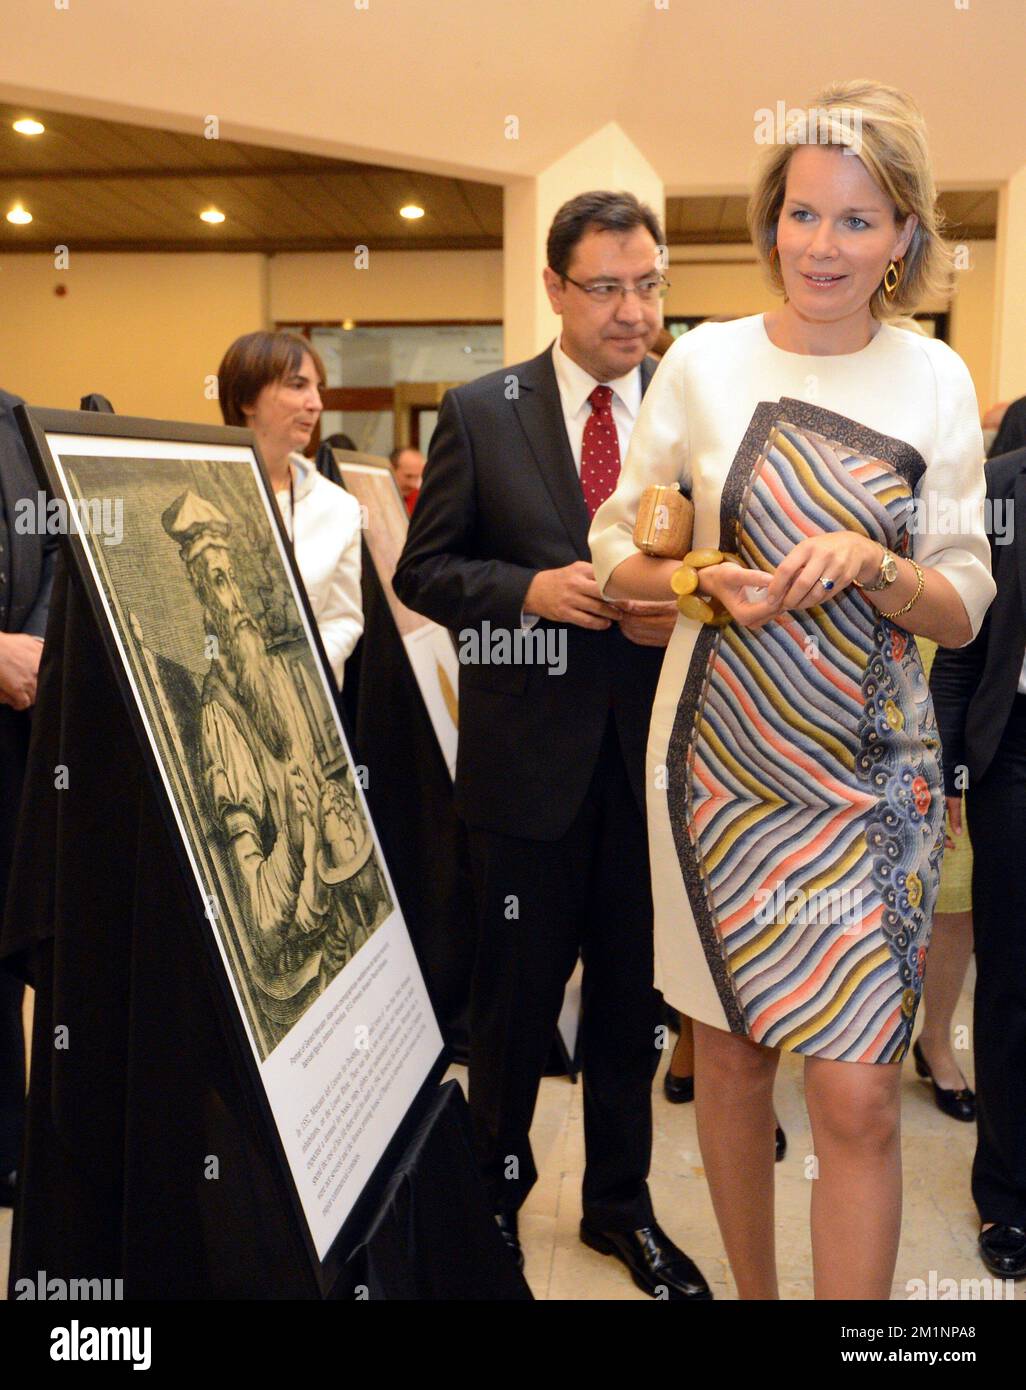 20121018 - ANKARA, TURKEY: Princess Mathilde of Belgium pictured during an exhibition on cartographers Mercator & Piri Reis, Thursday 18 October 2012, on the fourth day of the economic mission of Prince Philippe in Turkey, from 15 to 18 October. BELGA PHOTO ERIC LALMAND Stock Photo